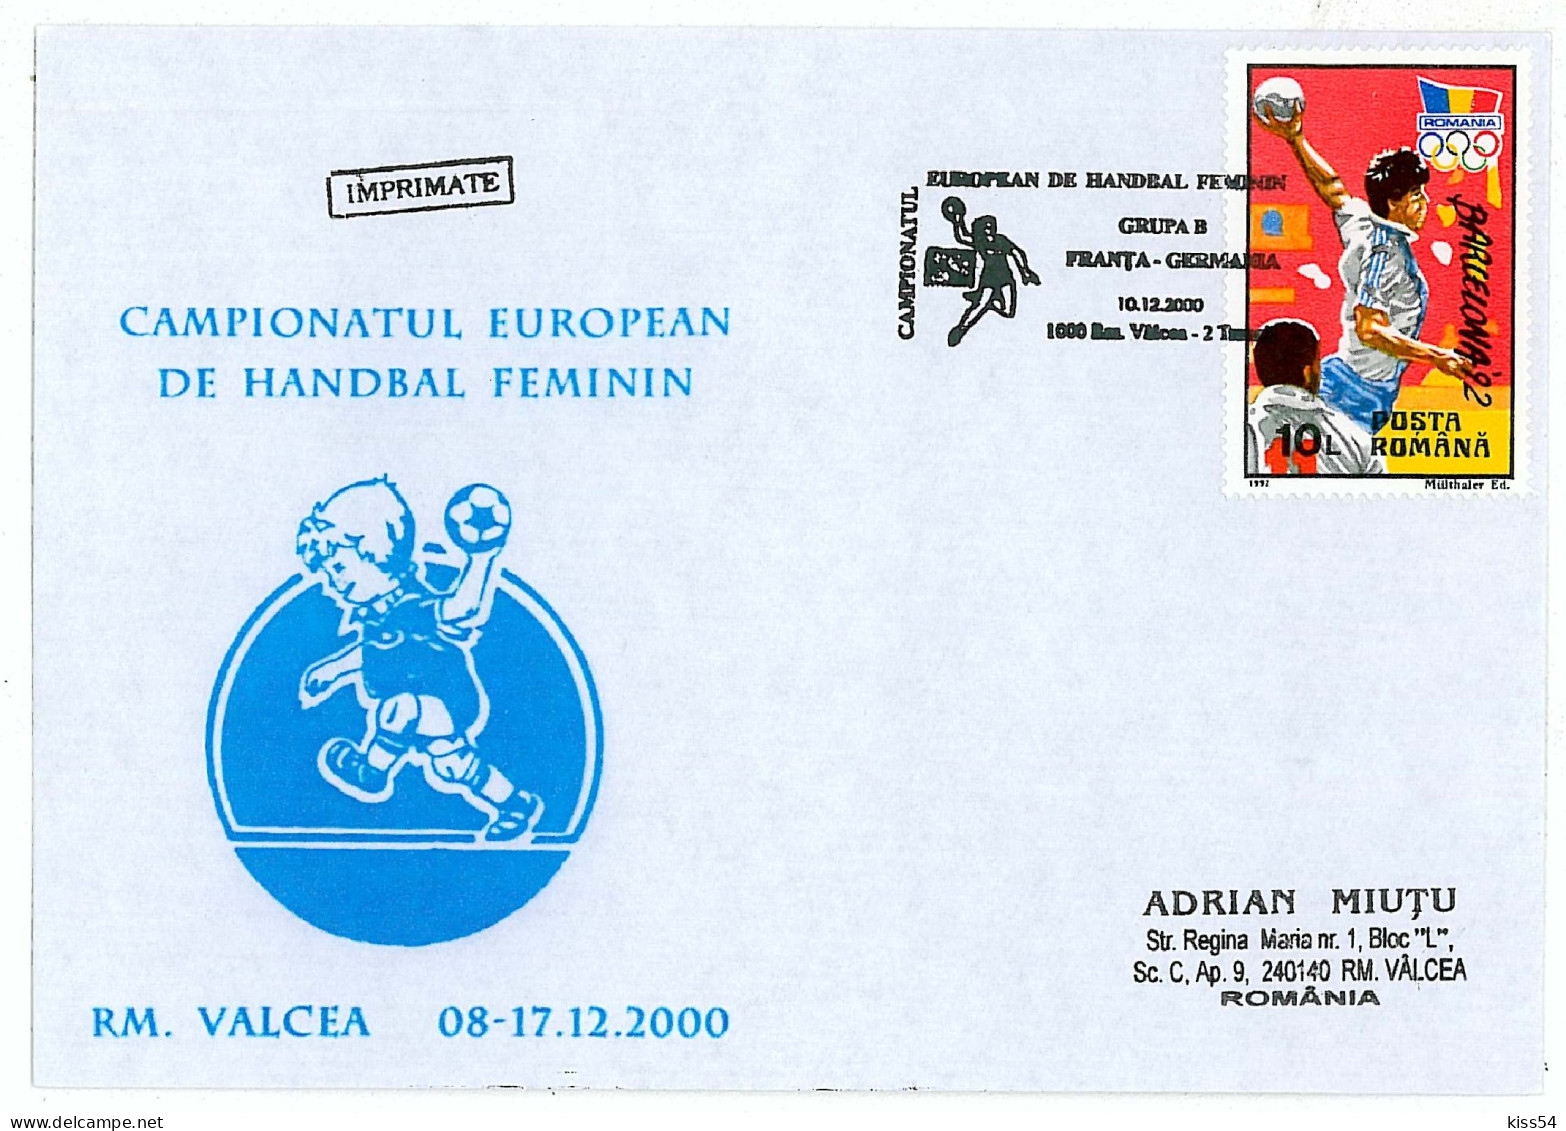 H 5 - 134 HANDBALL, France-Germany, Romania - Cover - Used - 2000 - Covers & Documents